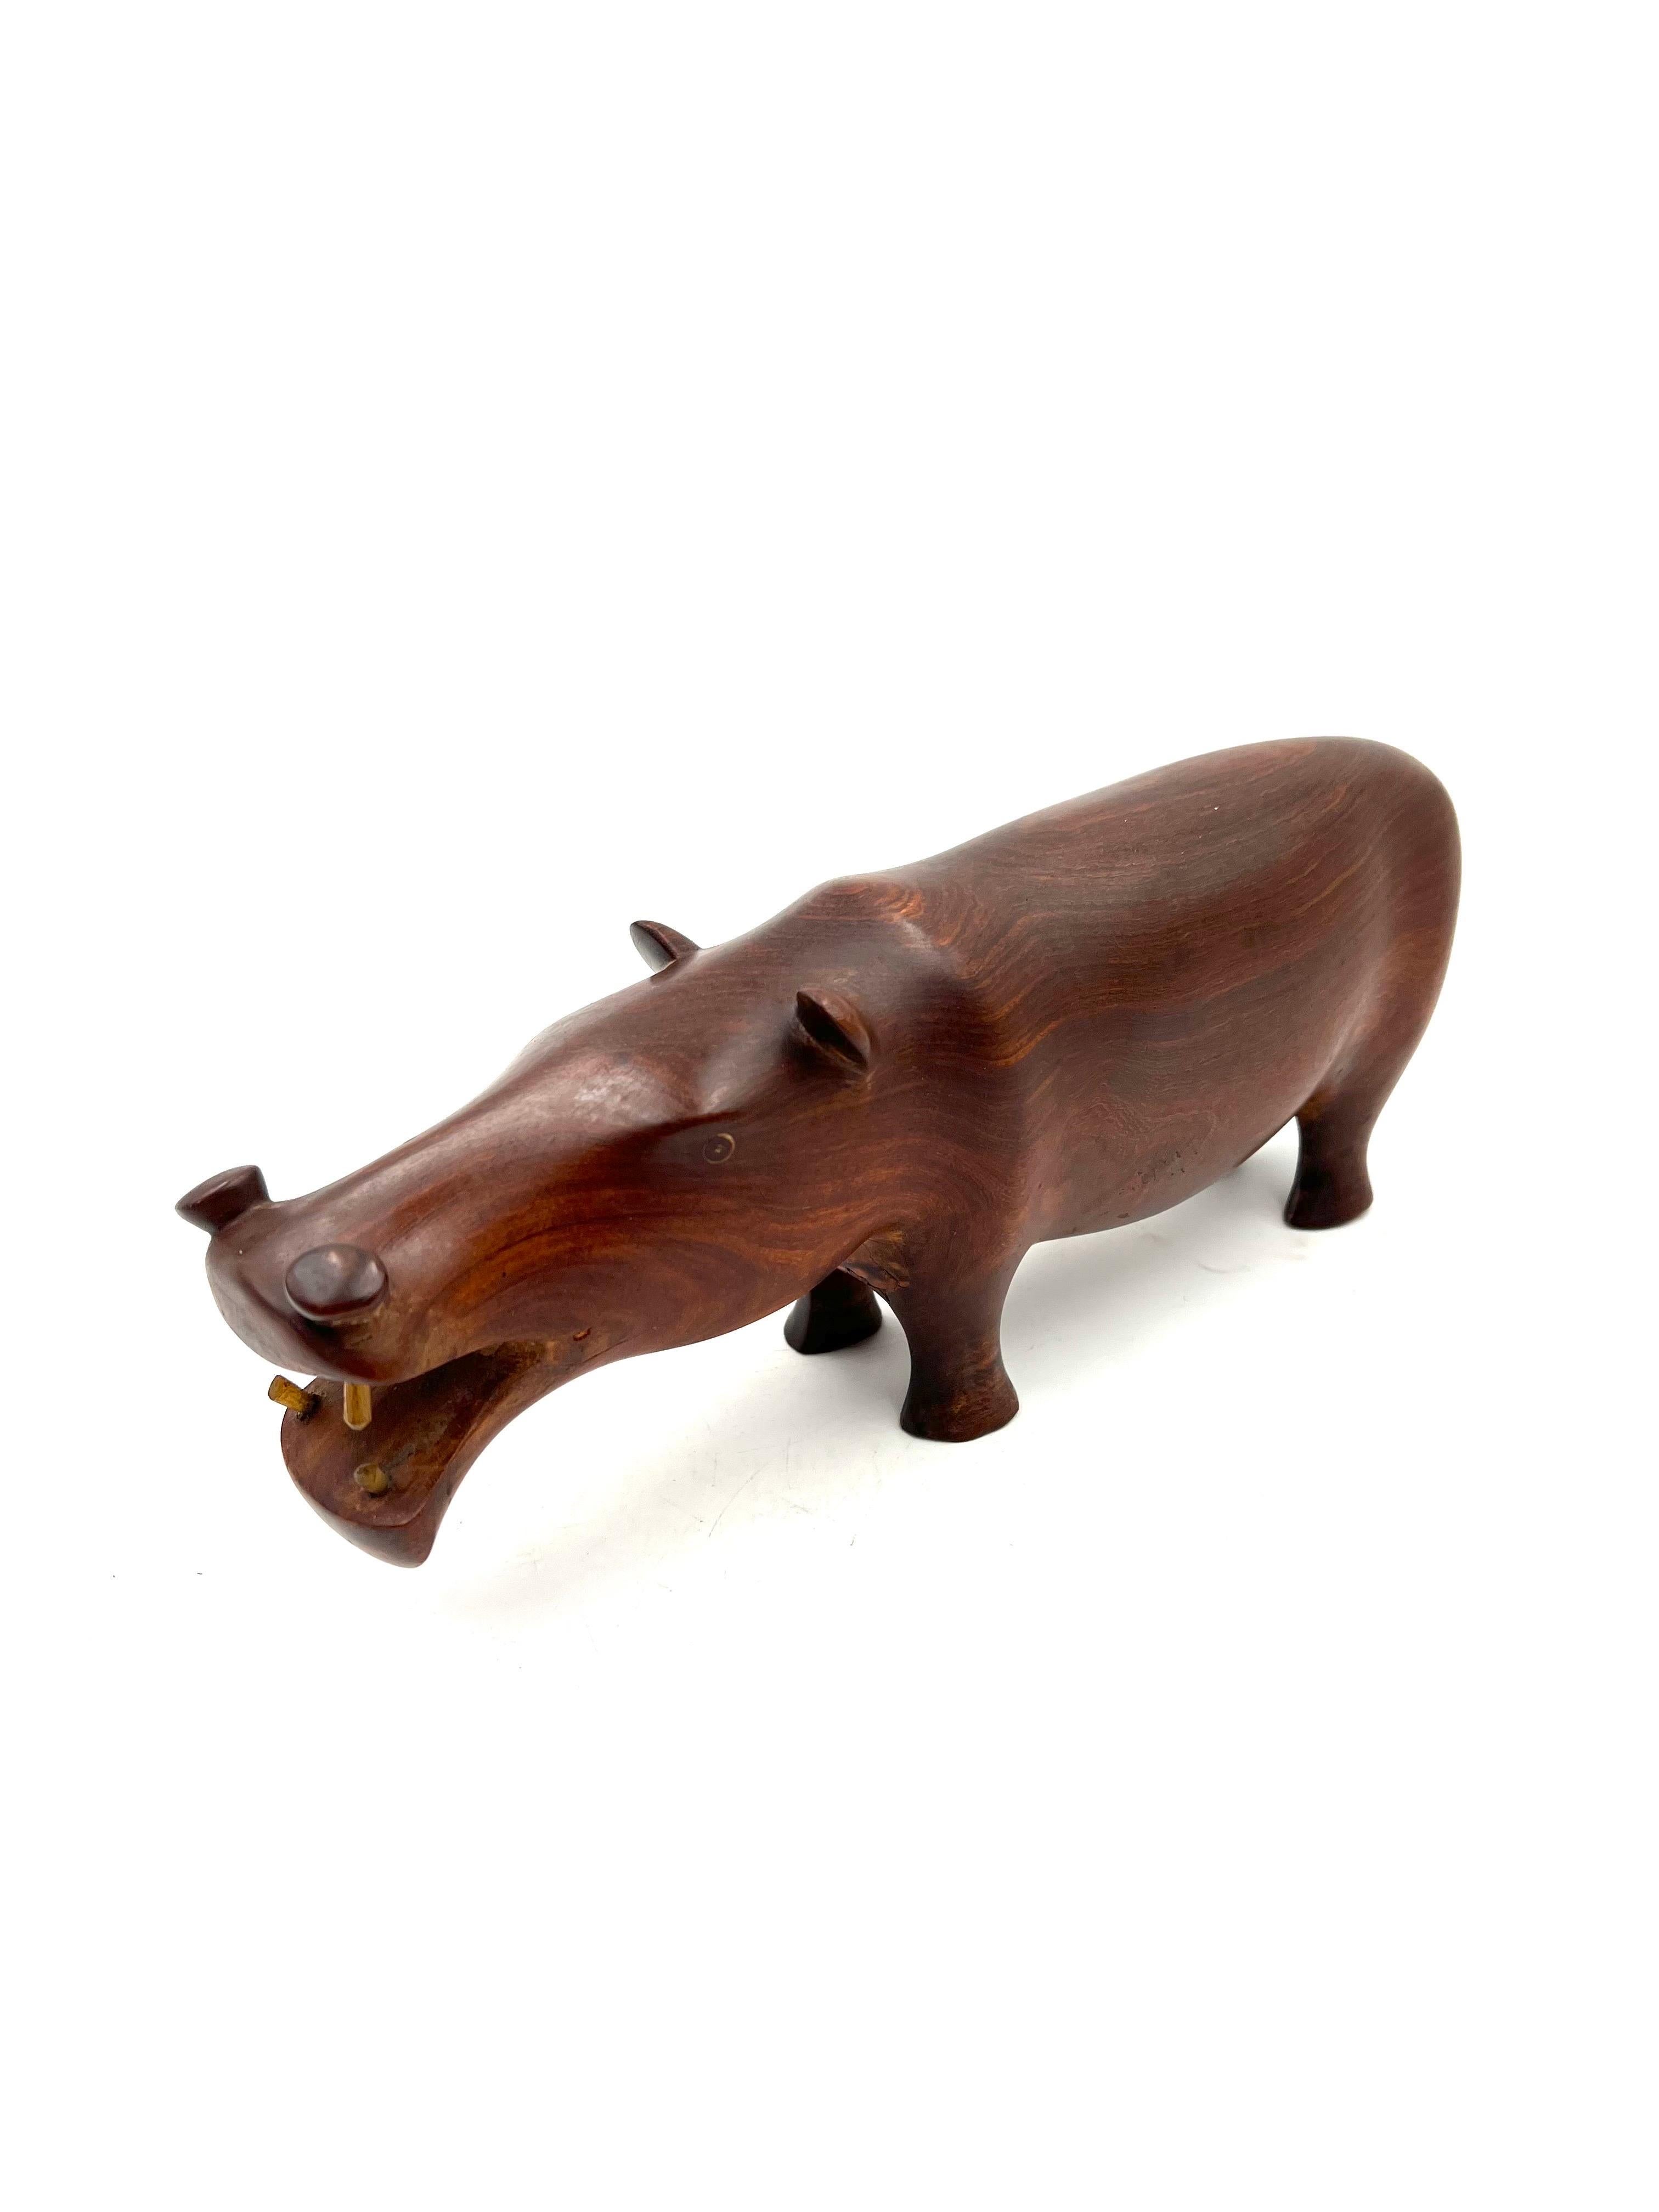 Beautiful and rare solid hand carved Hippopotamus rosewood sculpture with bone teeth, circa 1970's, nice original condition no chips cracks or scratches.